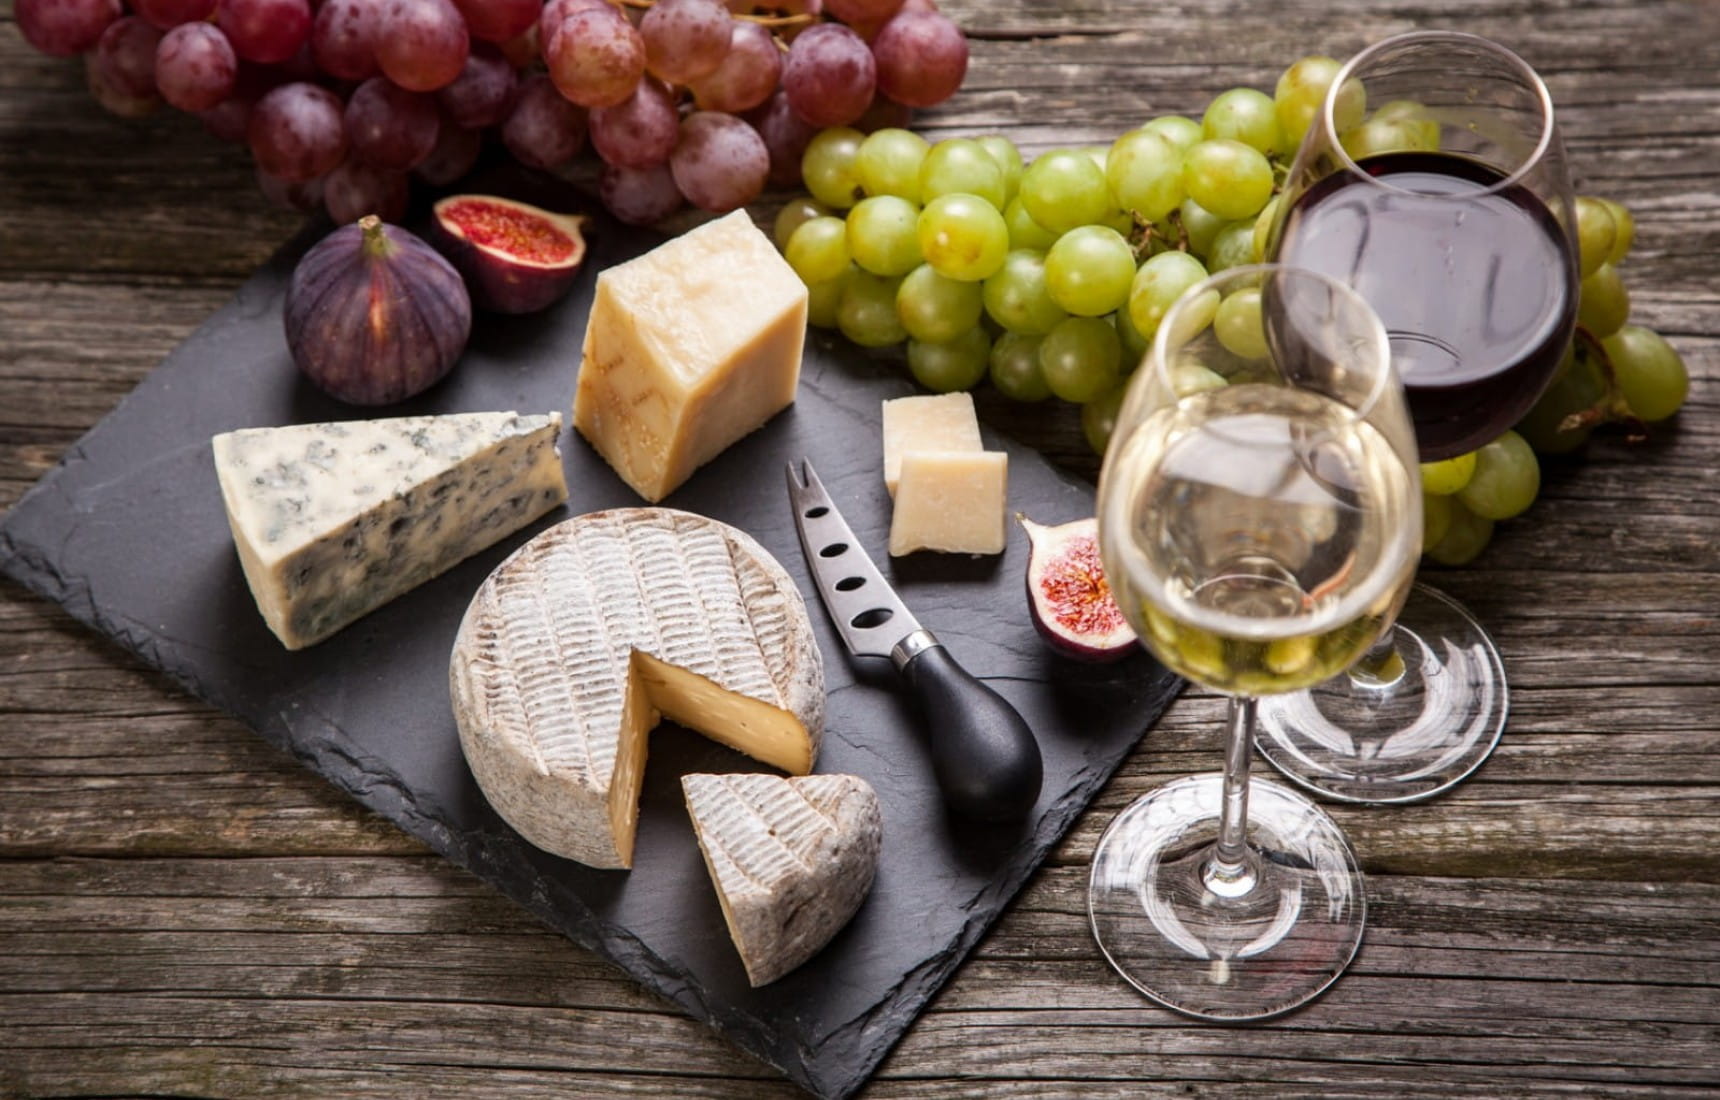 IV. Classic Cheese and Wine Pairings